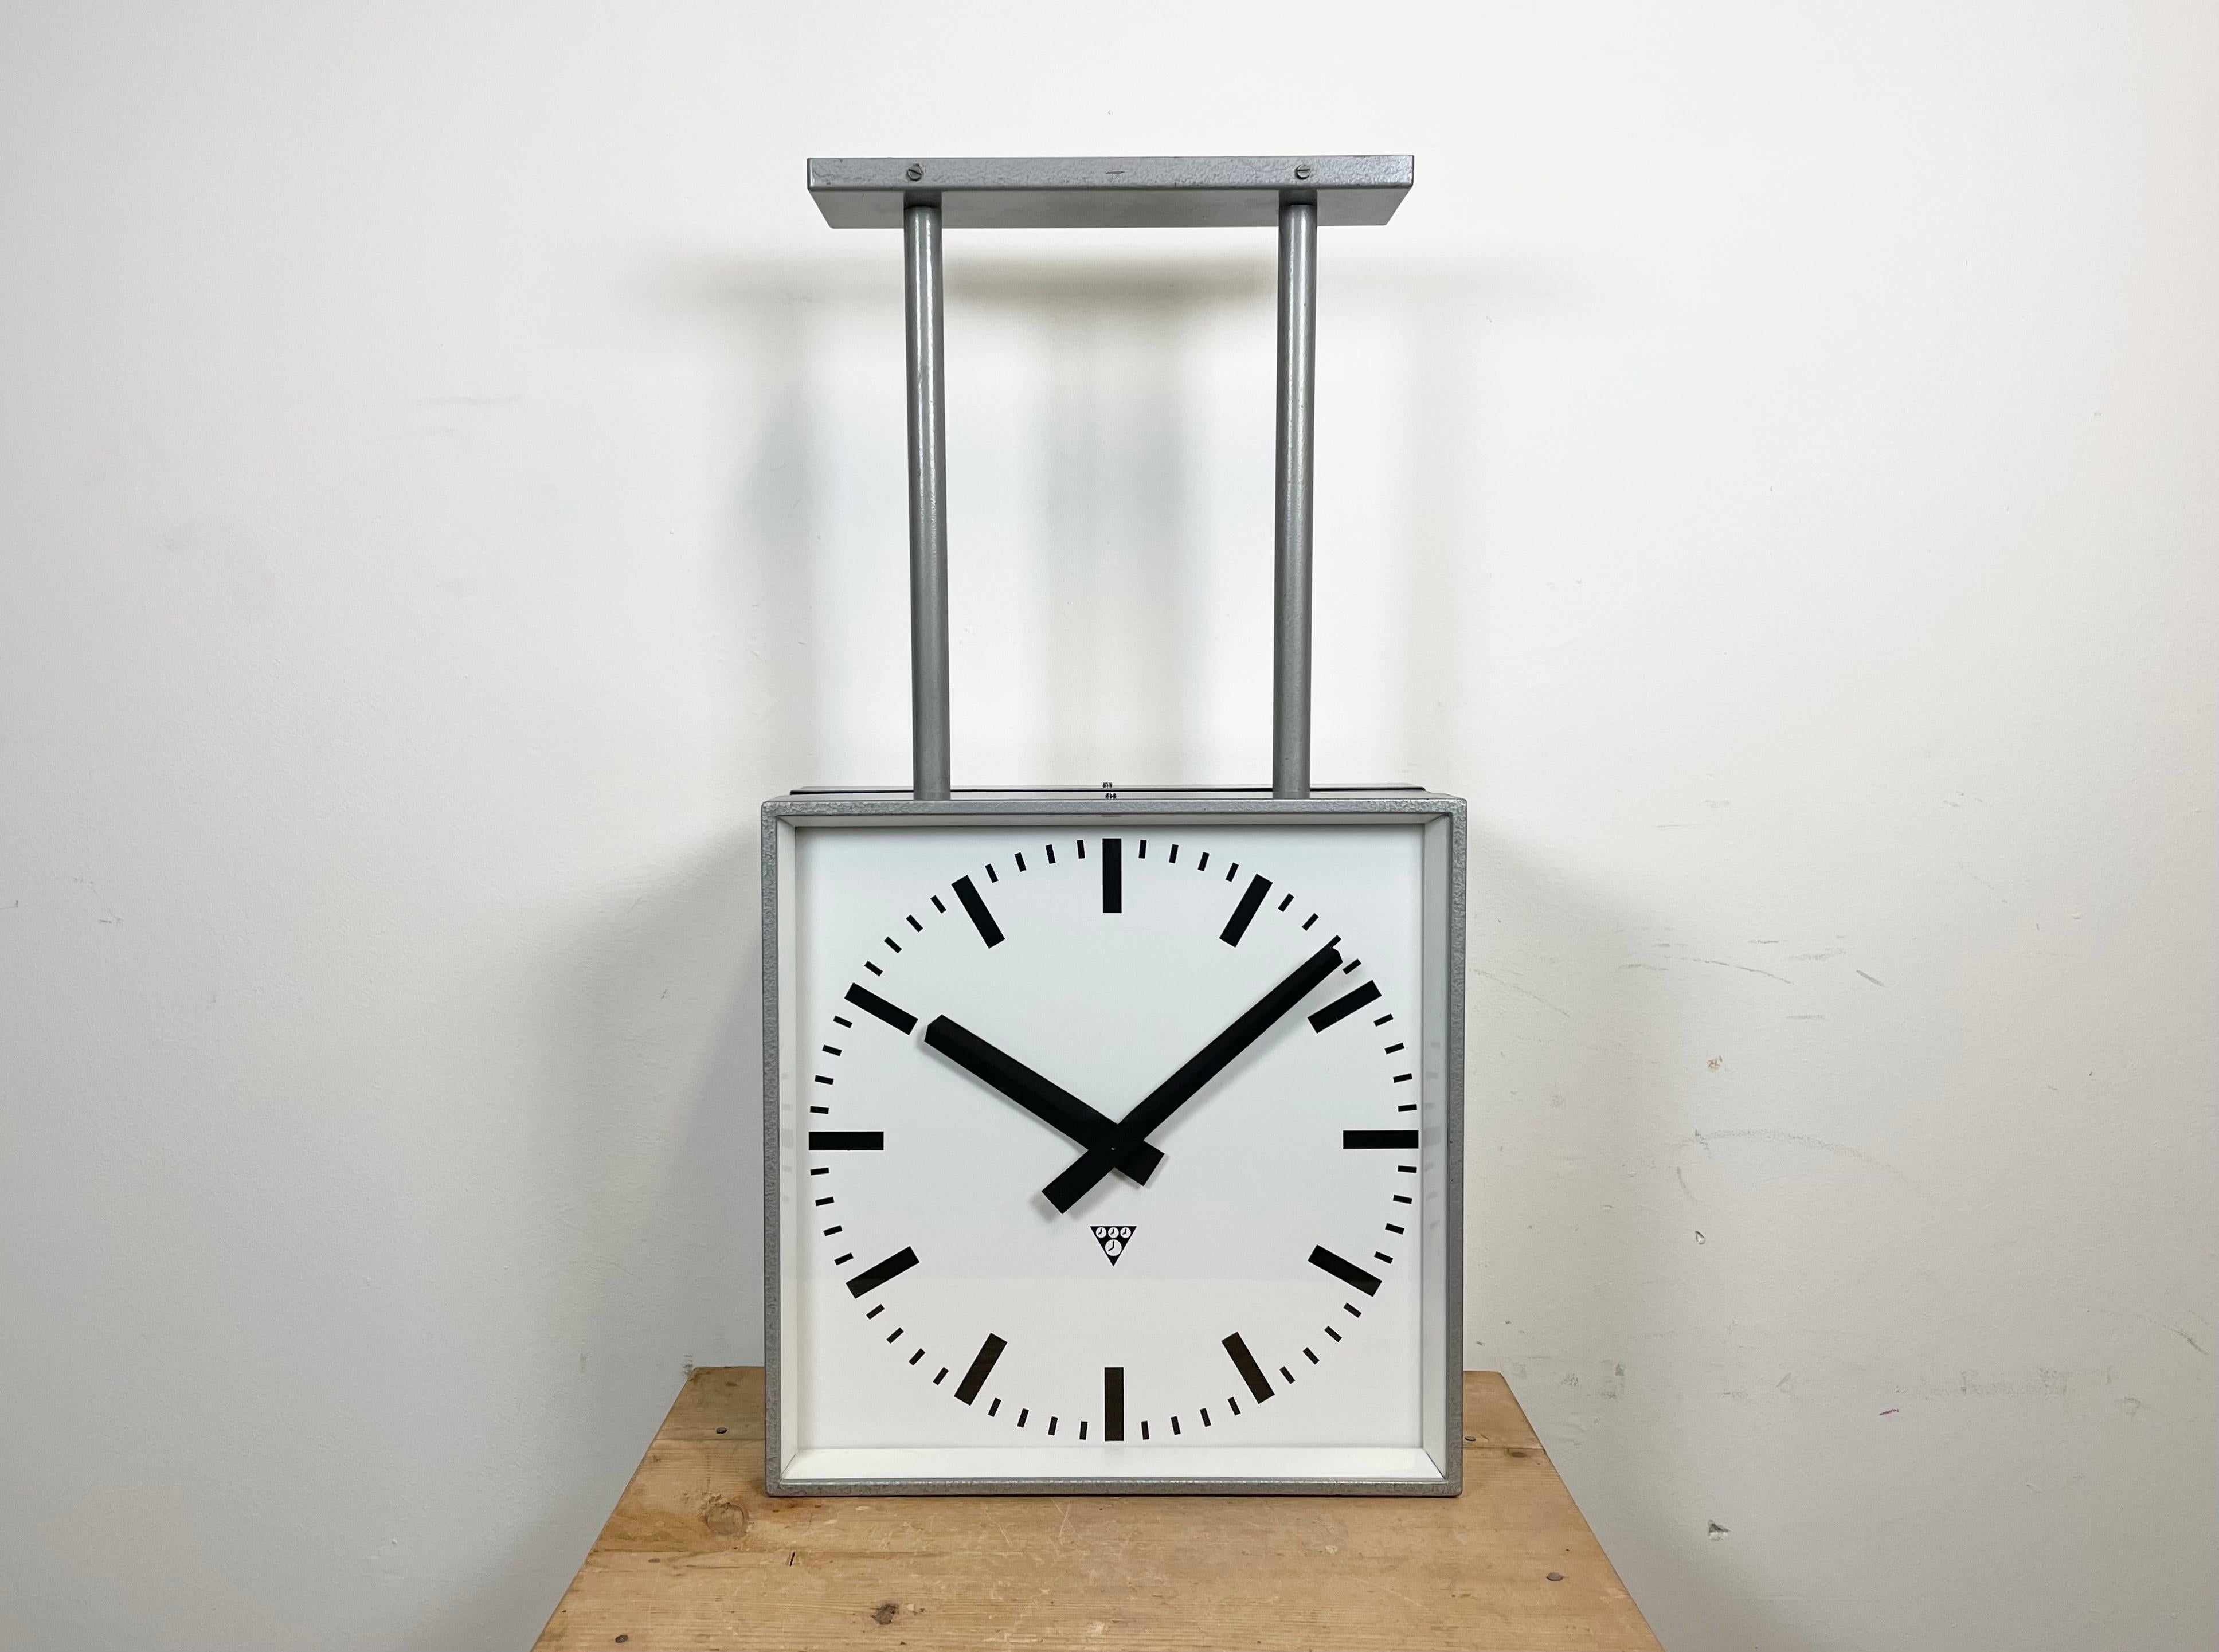 This square double-sided railway, school or factory clock was produced by Pragotron, in former Czechoslovakia, during the 1970s. The piece features a grey hammerpaint metal body, a clear glass cover, and an aluminum dial and hands. The clock has